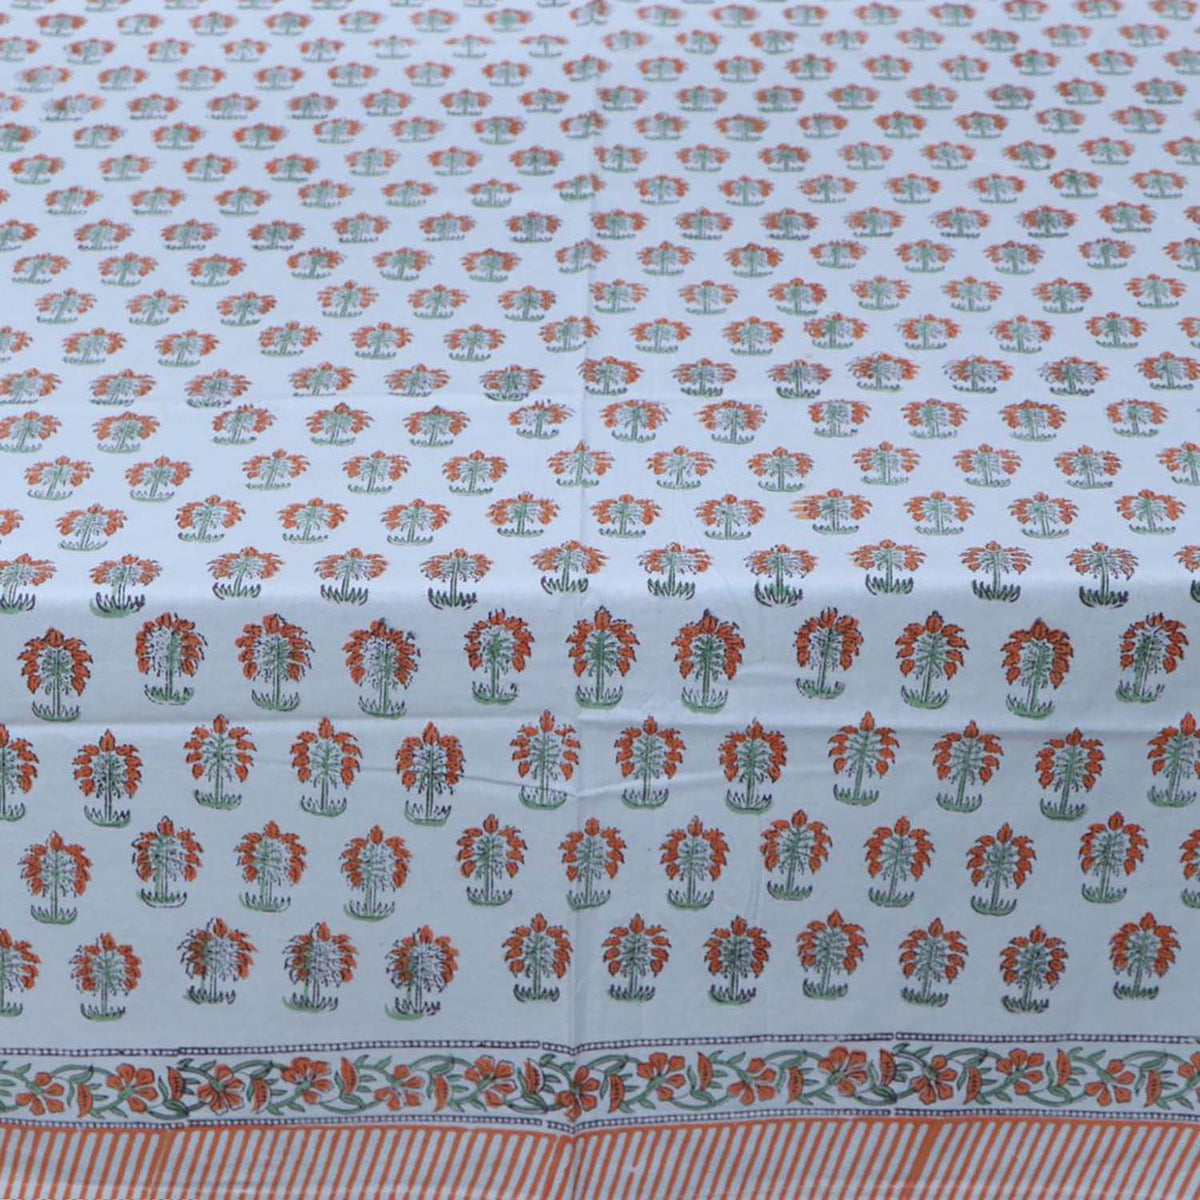 Orange Palm Trees Block Printed Rectangle Tablecloth Table Cover